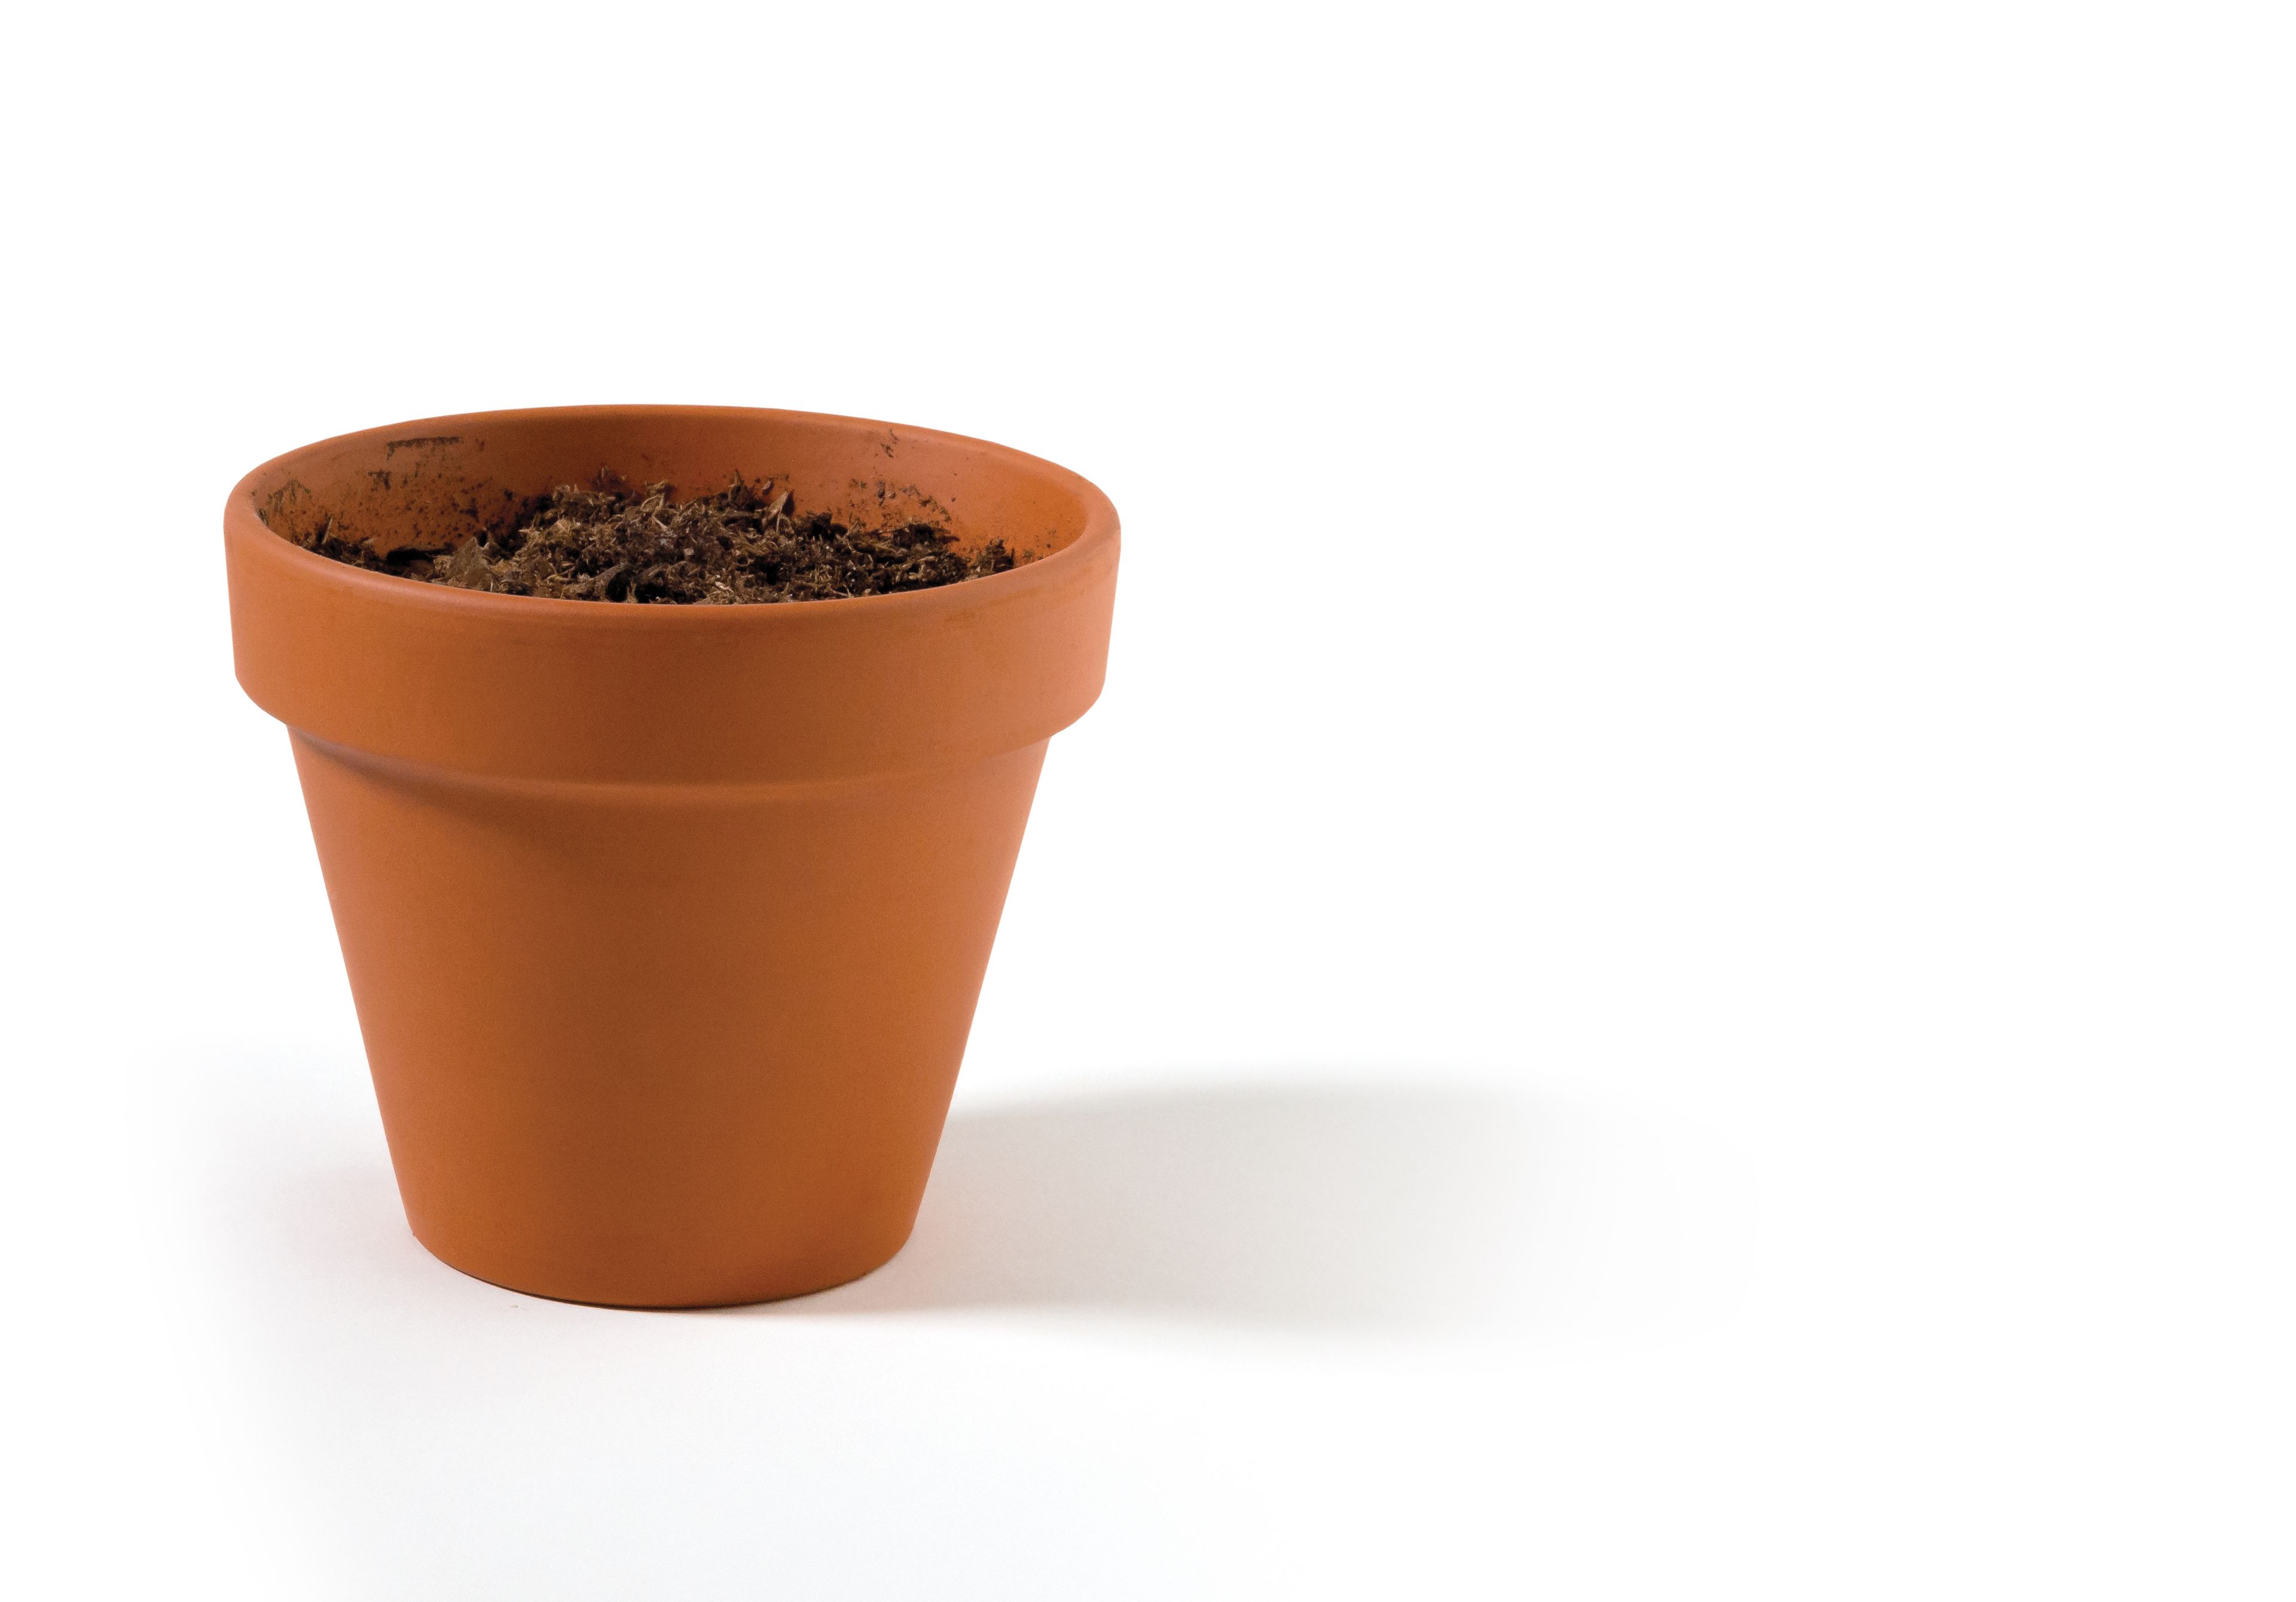 A small terra-cotta pot filled with dirt.